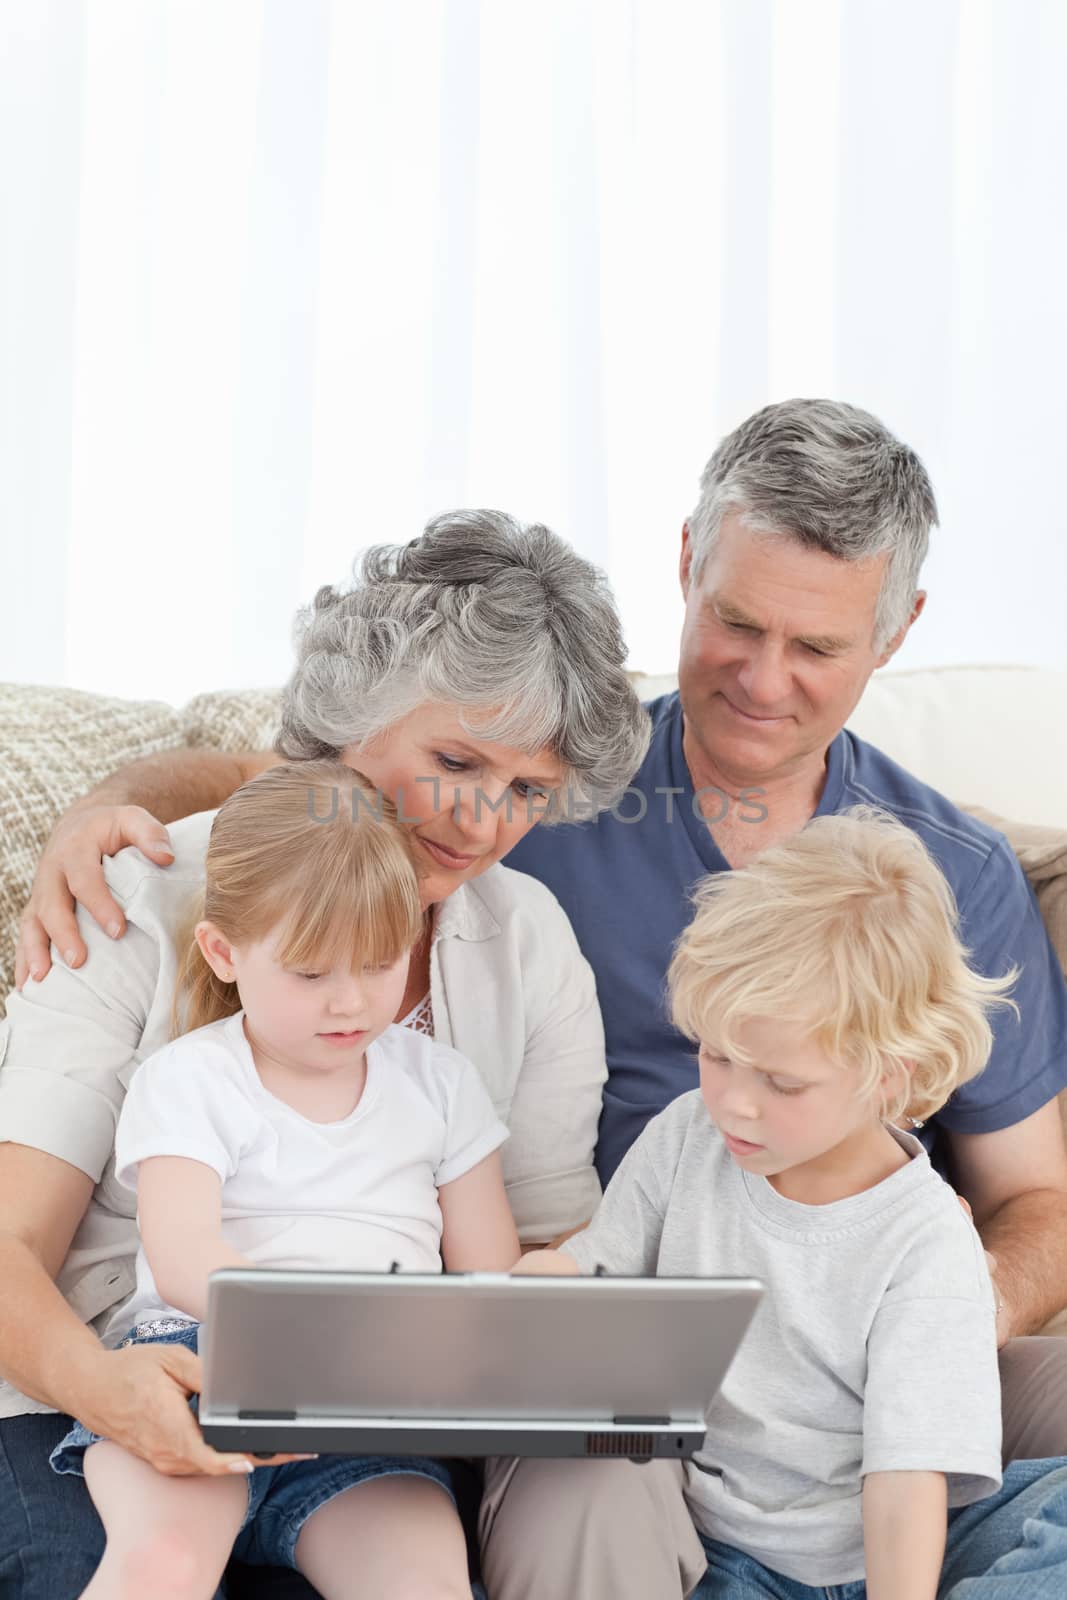 Adorable family looking at the laptop at home